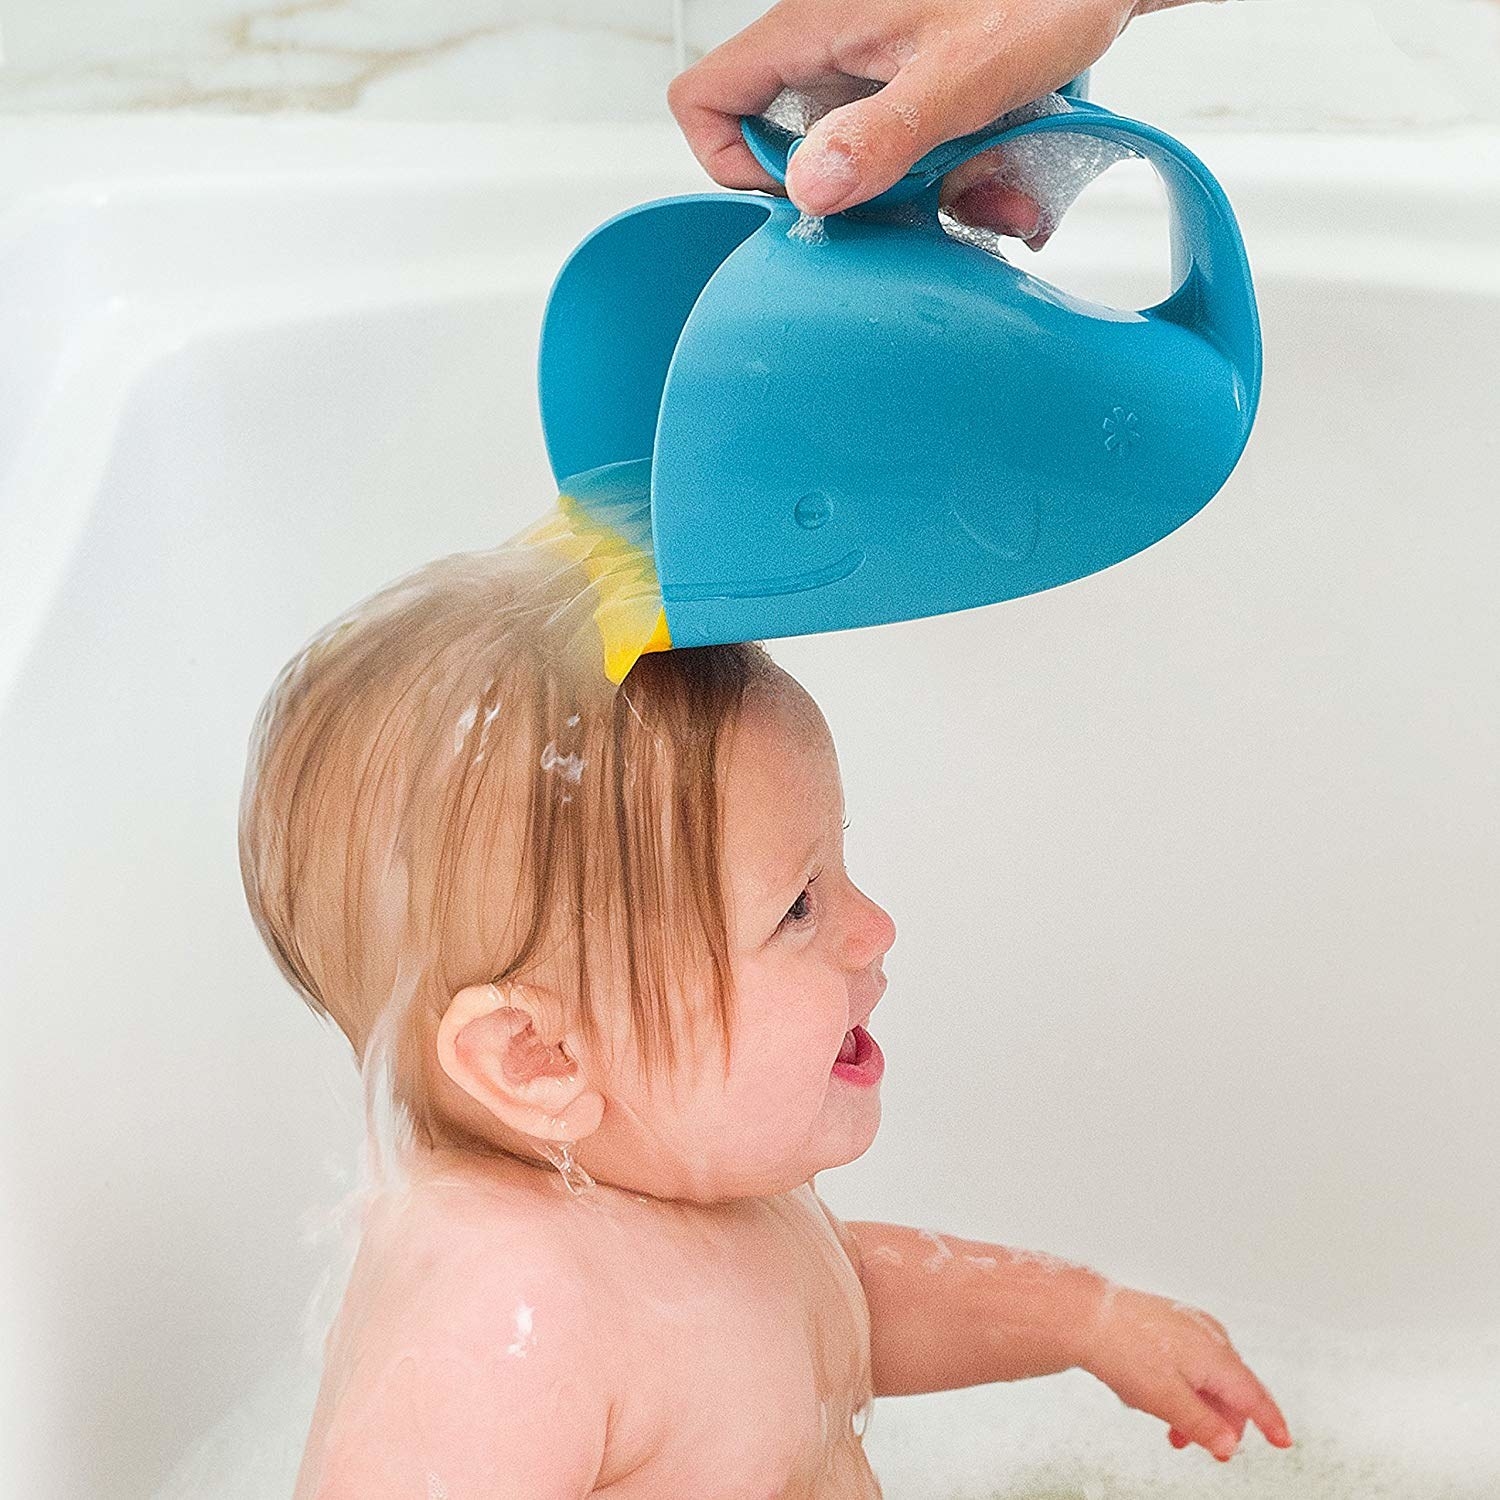 person pouring water on a baby's head using the whale-shaped rinser